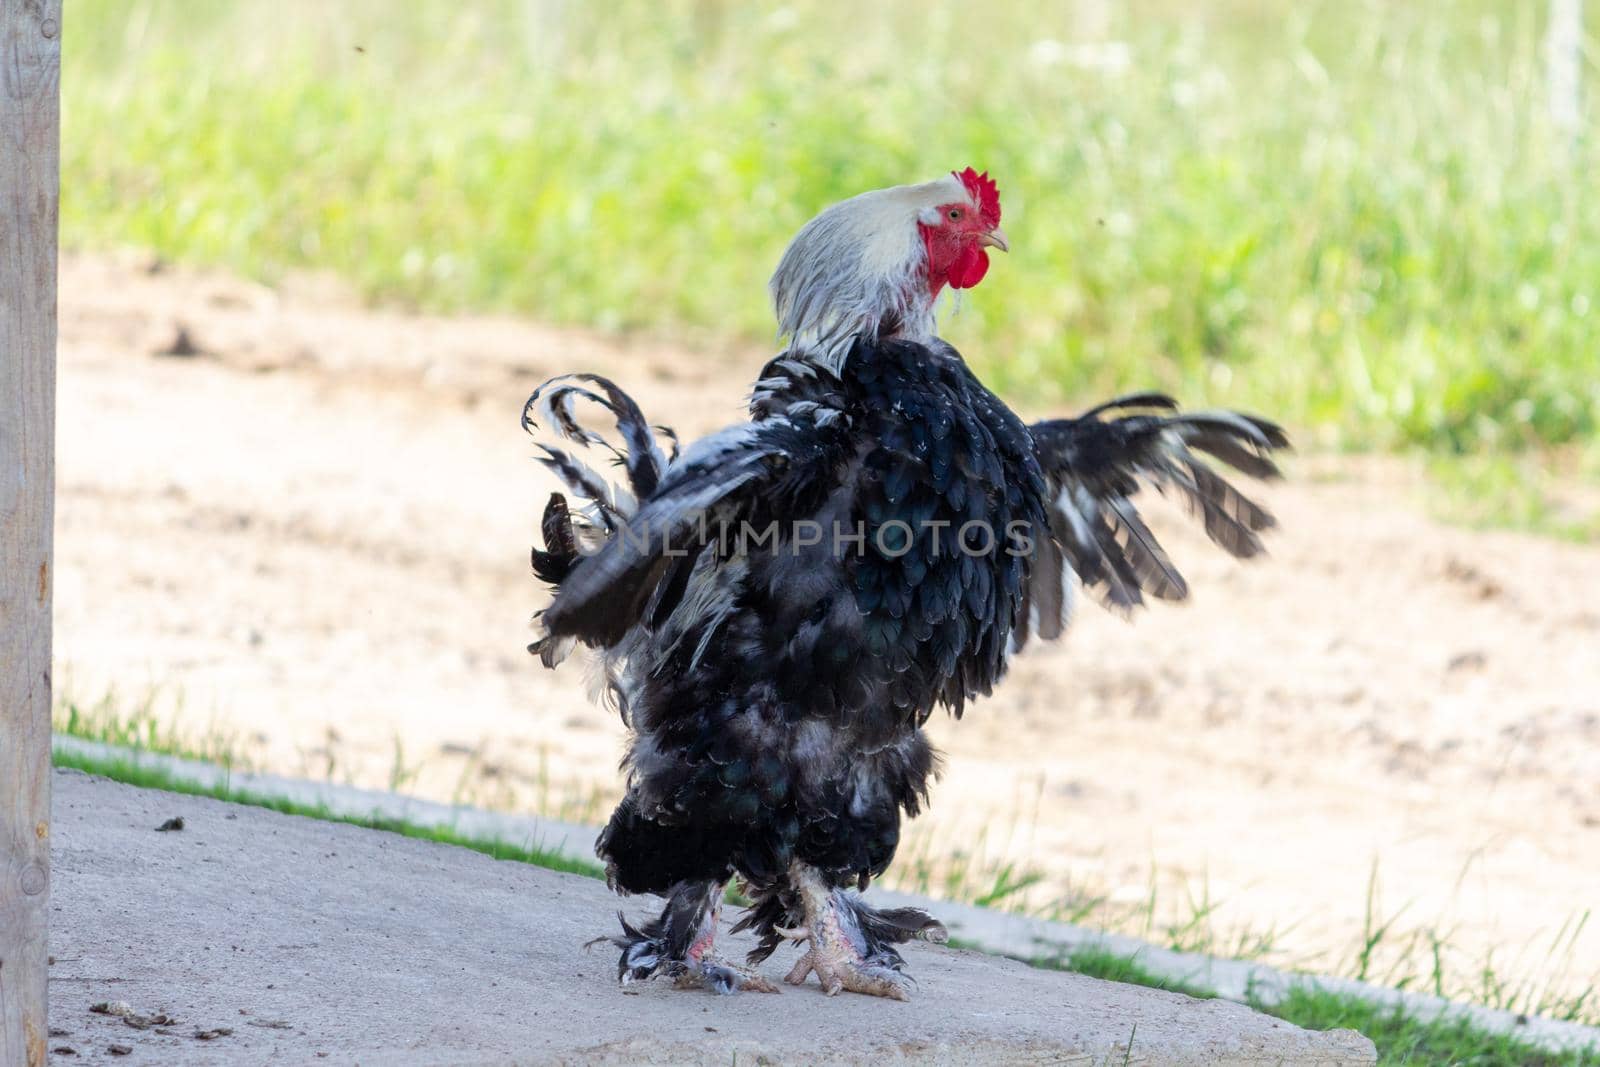 Rooster and hens on the farm walks and spread its wings by SorokinNikita